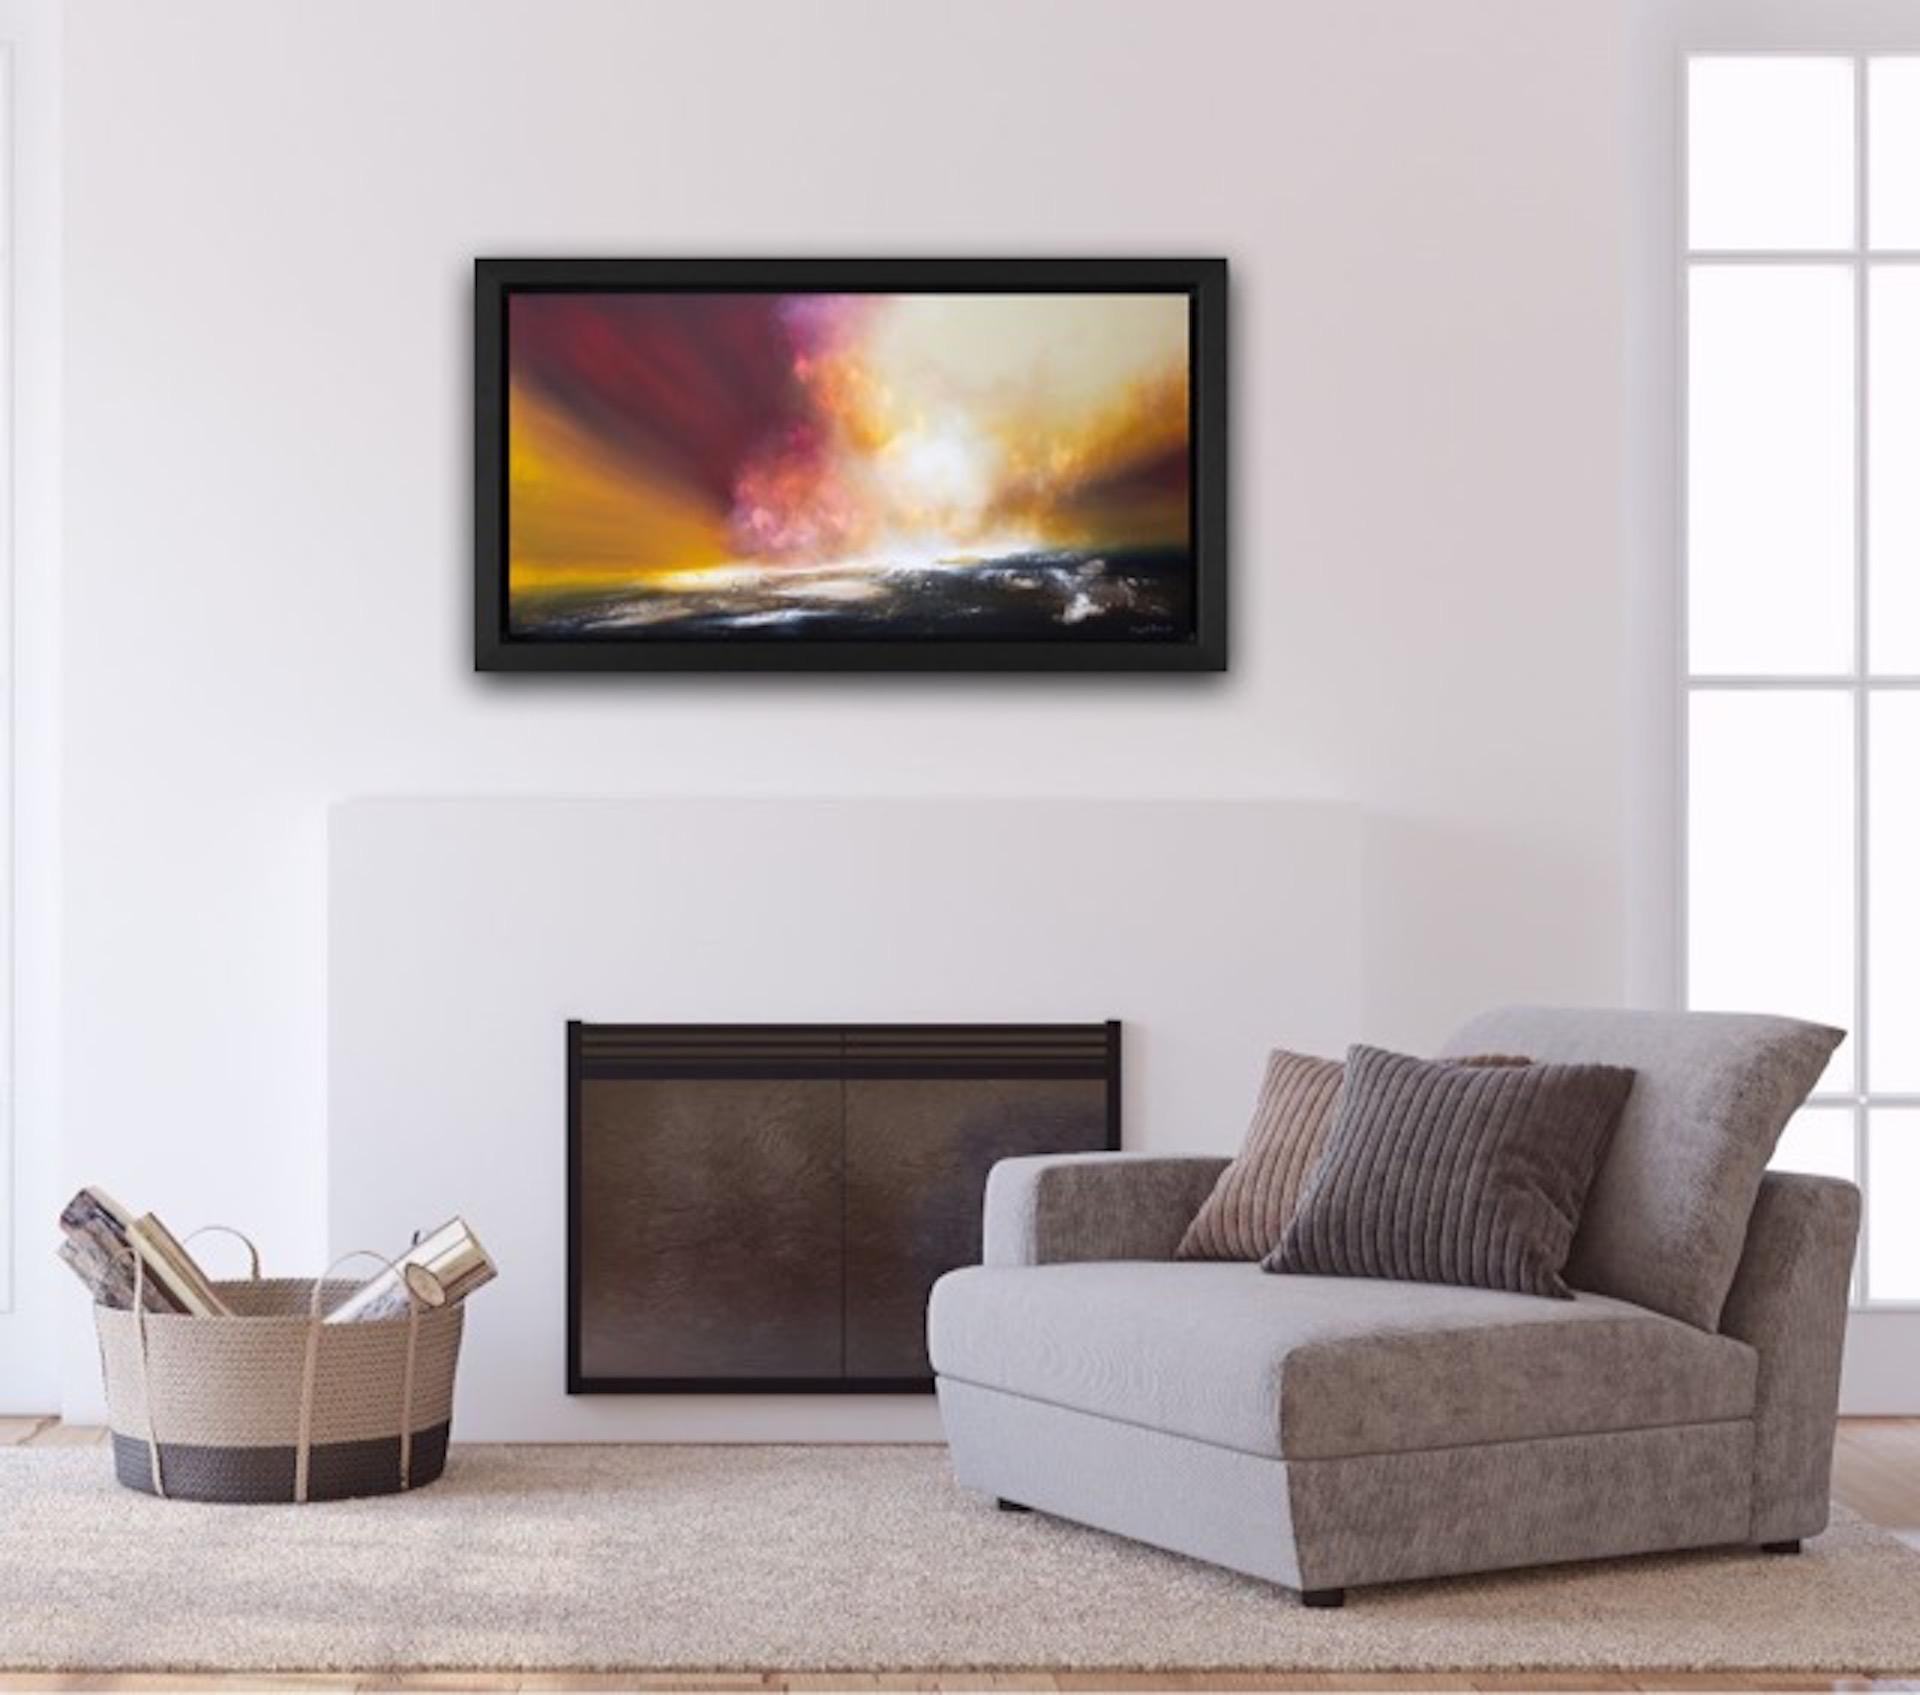 Sheryl Roberts
Timeless Overture
Original Seascape Paintings
Oil and Acrylic Paint on Canvas
Frame Size: H 63cm x W 113cm x D 5cm
Sold Framed in a Black Float Frame
Ready to Hang
Please note that insitu images are purely an indication of how a piece